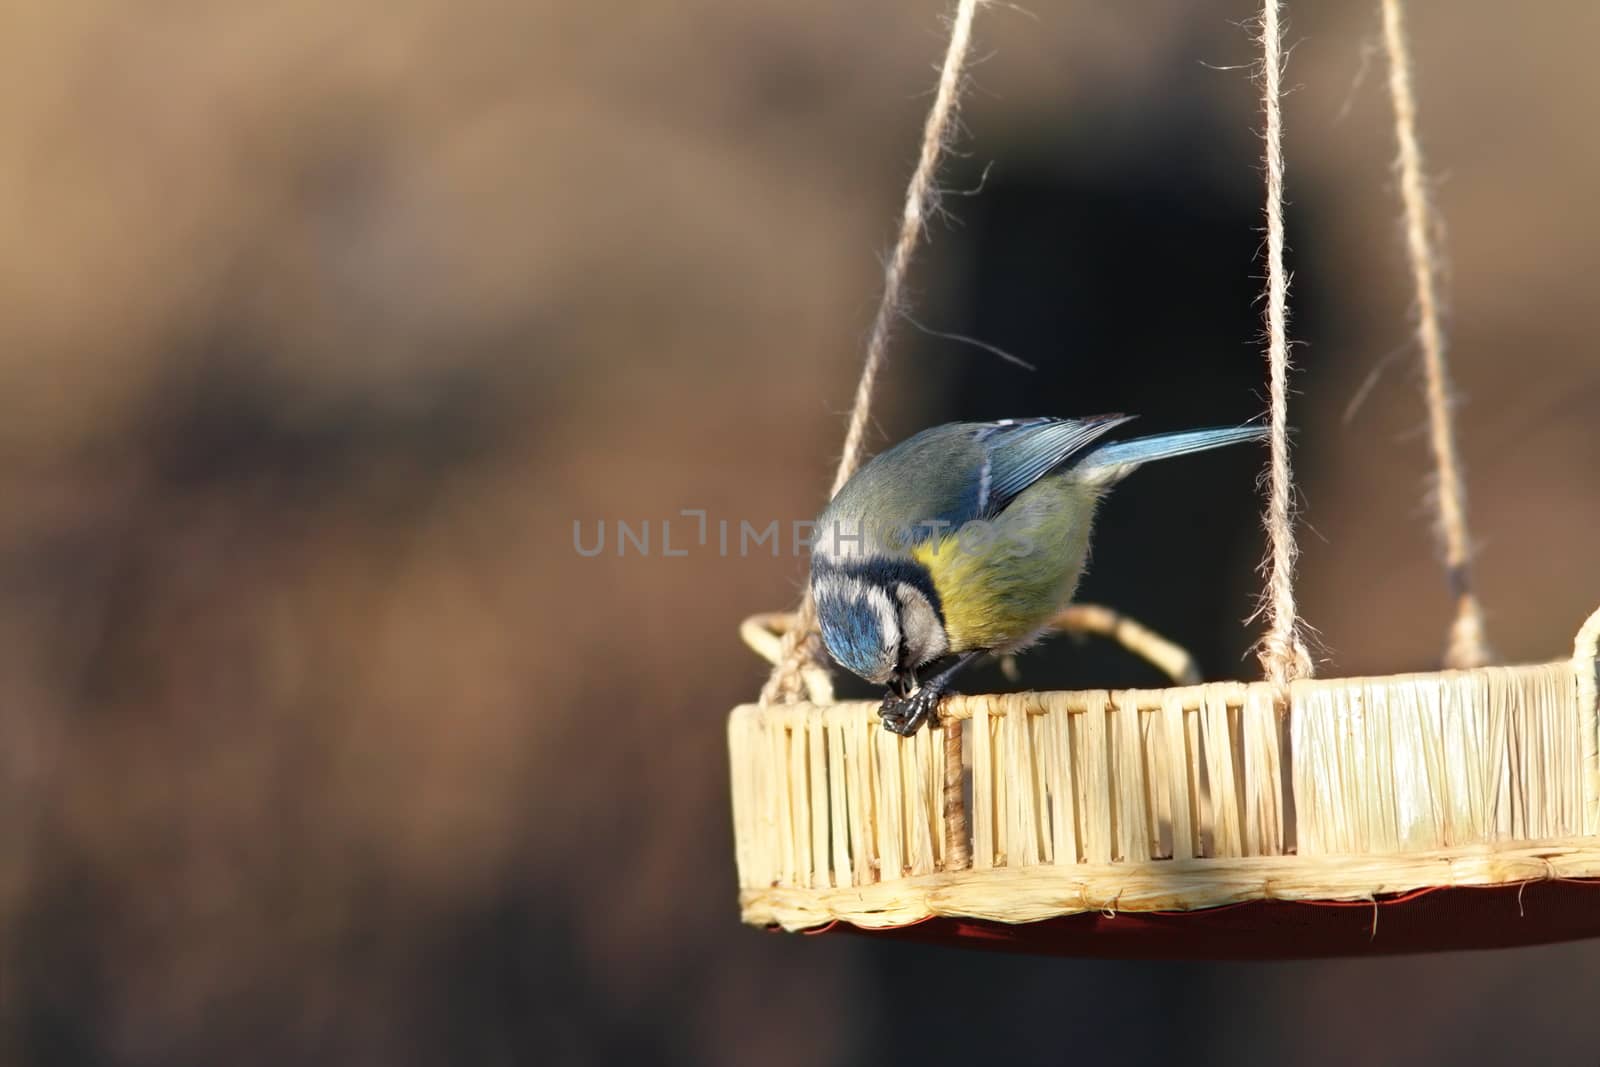 blue tit ( parus caeruleus ) eating small seed from the feeder